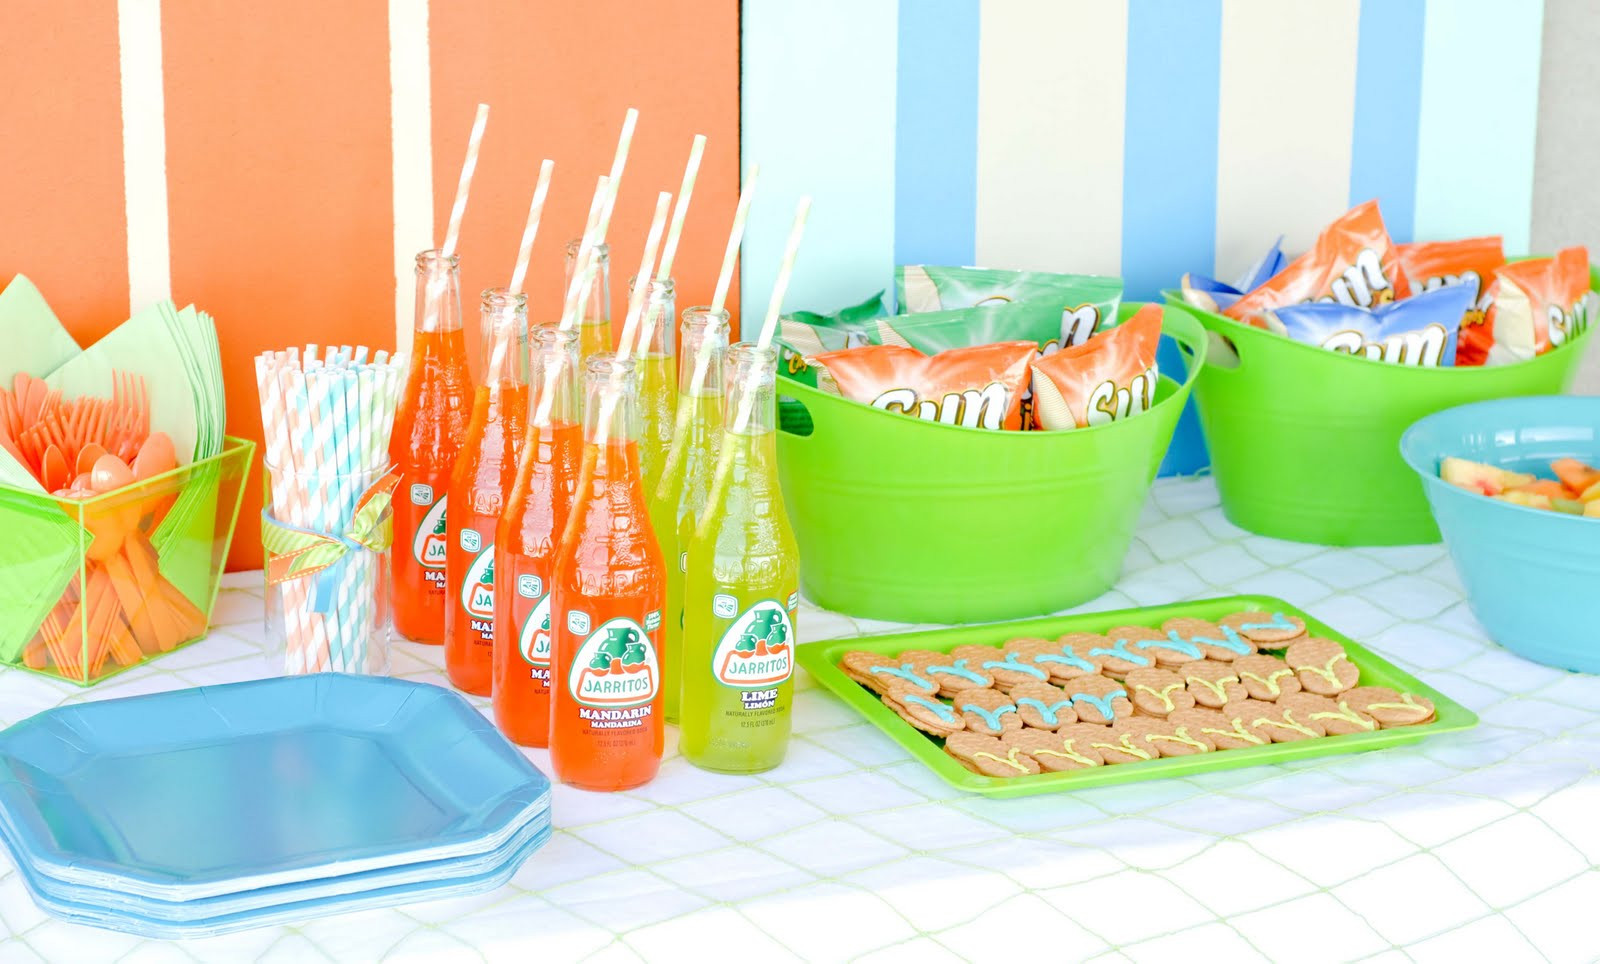 Summer Pool Party Food Ideas
 Kara s Party Ideas Surf s Up Summer Pool Party